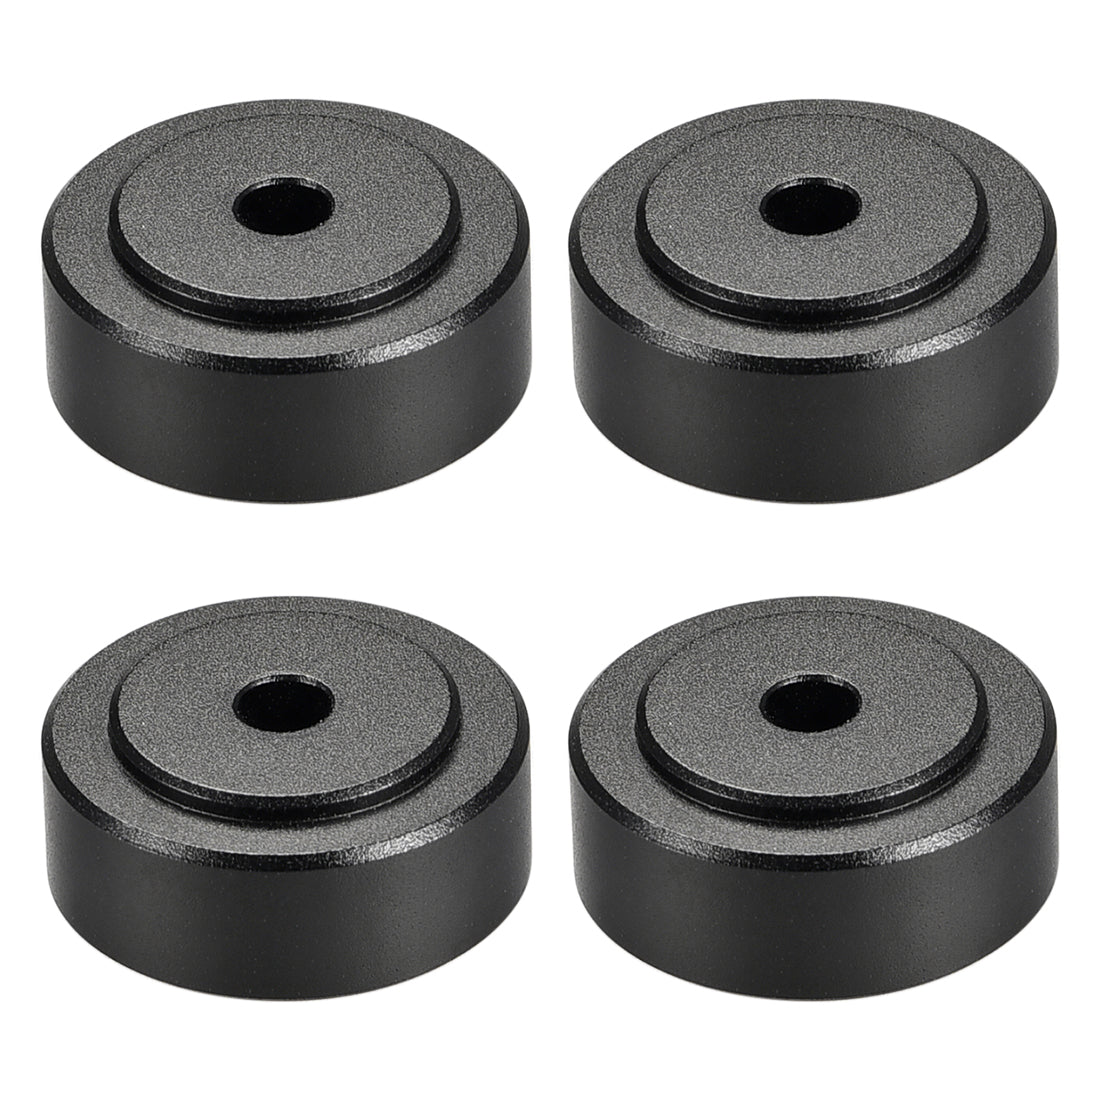 uxcell Uxcell 4 Pcs D20xH8mm Aluminum Feet Anti-Vibration Base Pad Stand with Rubber O Ring for Speaker Guitar Amplifier HiFi Black